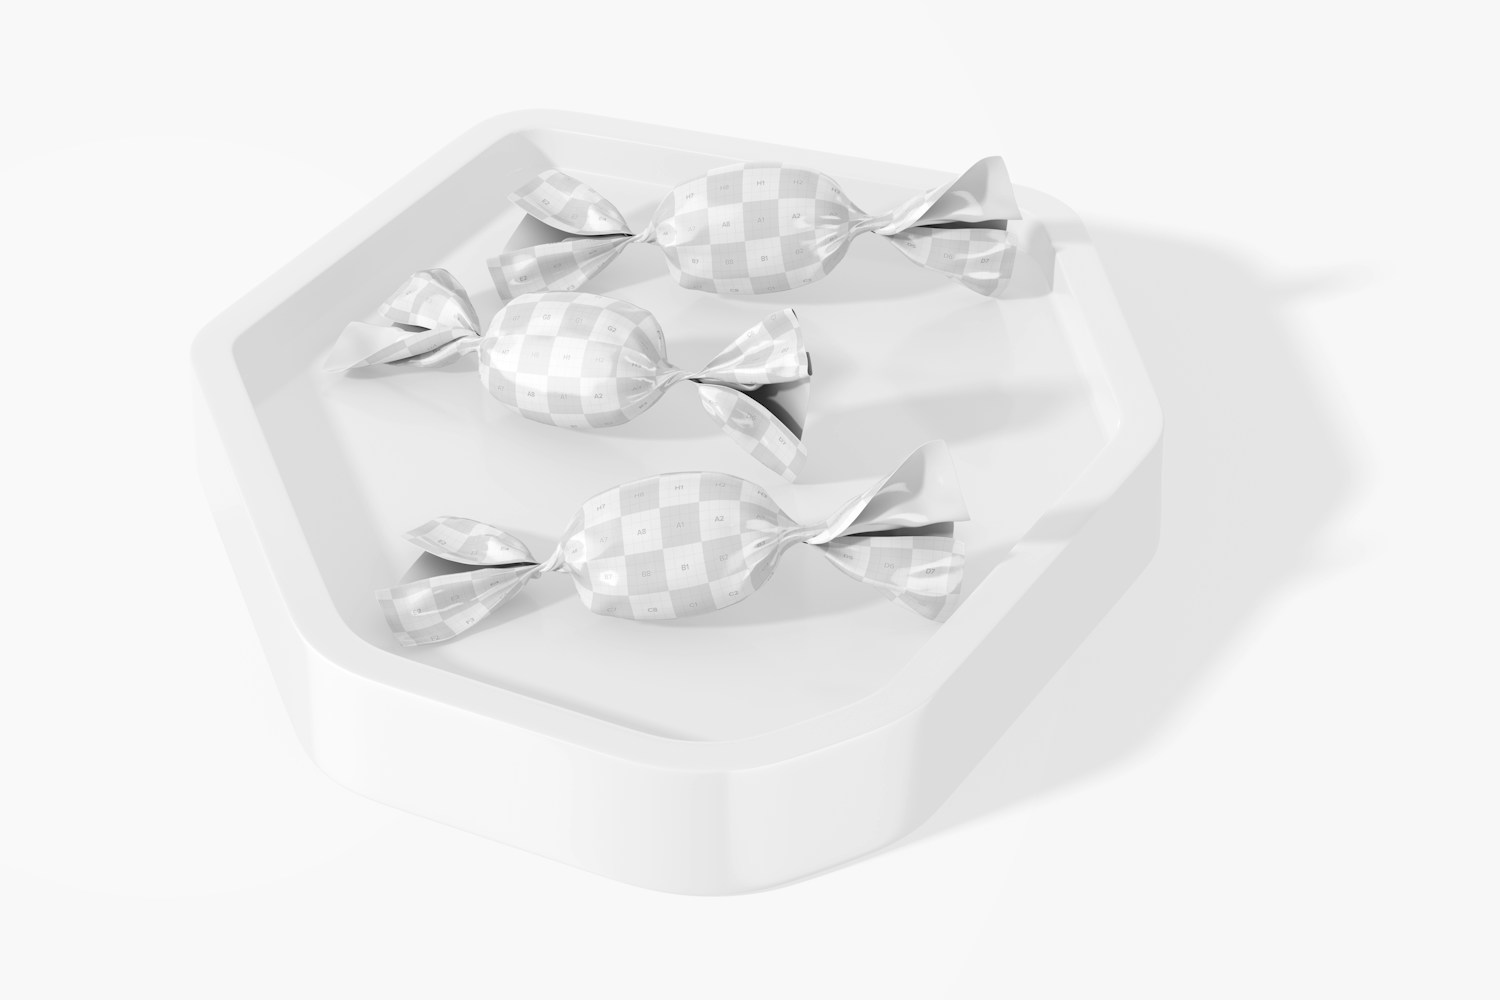 Candy Wrappers Mockup, on Tray